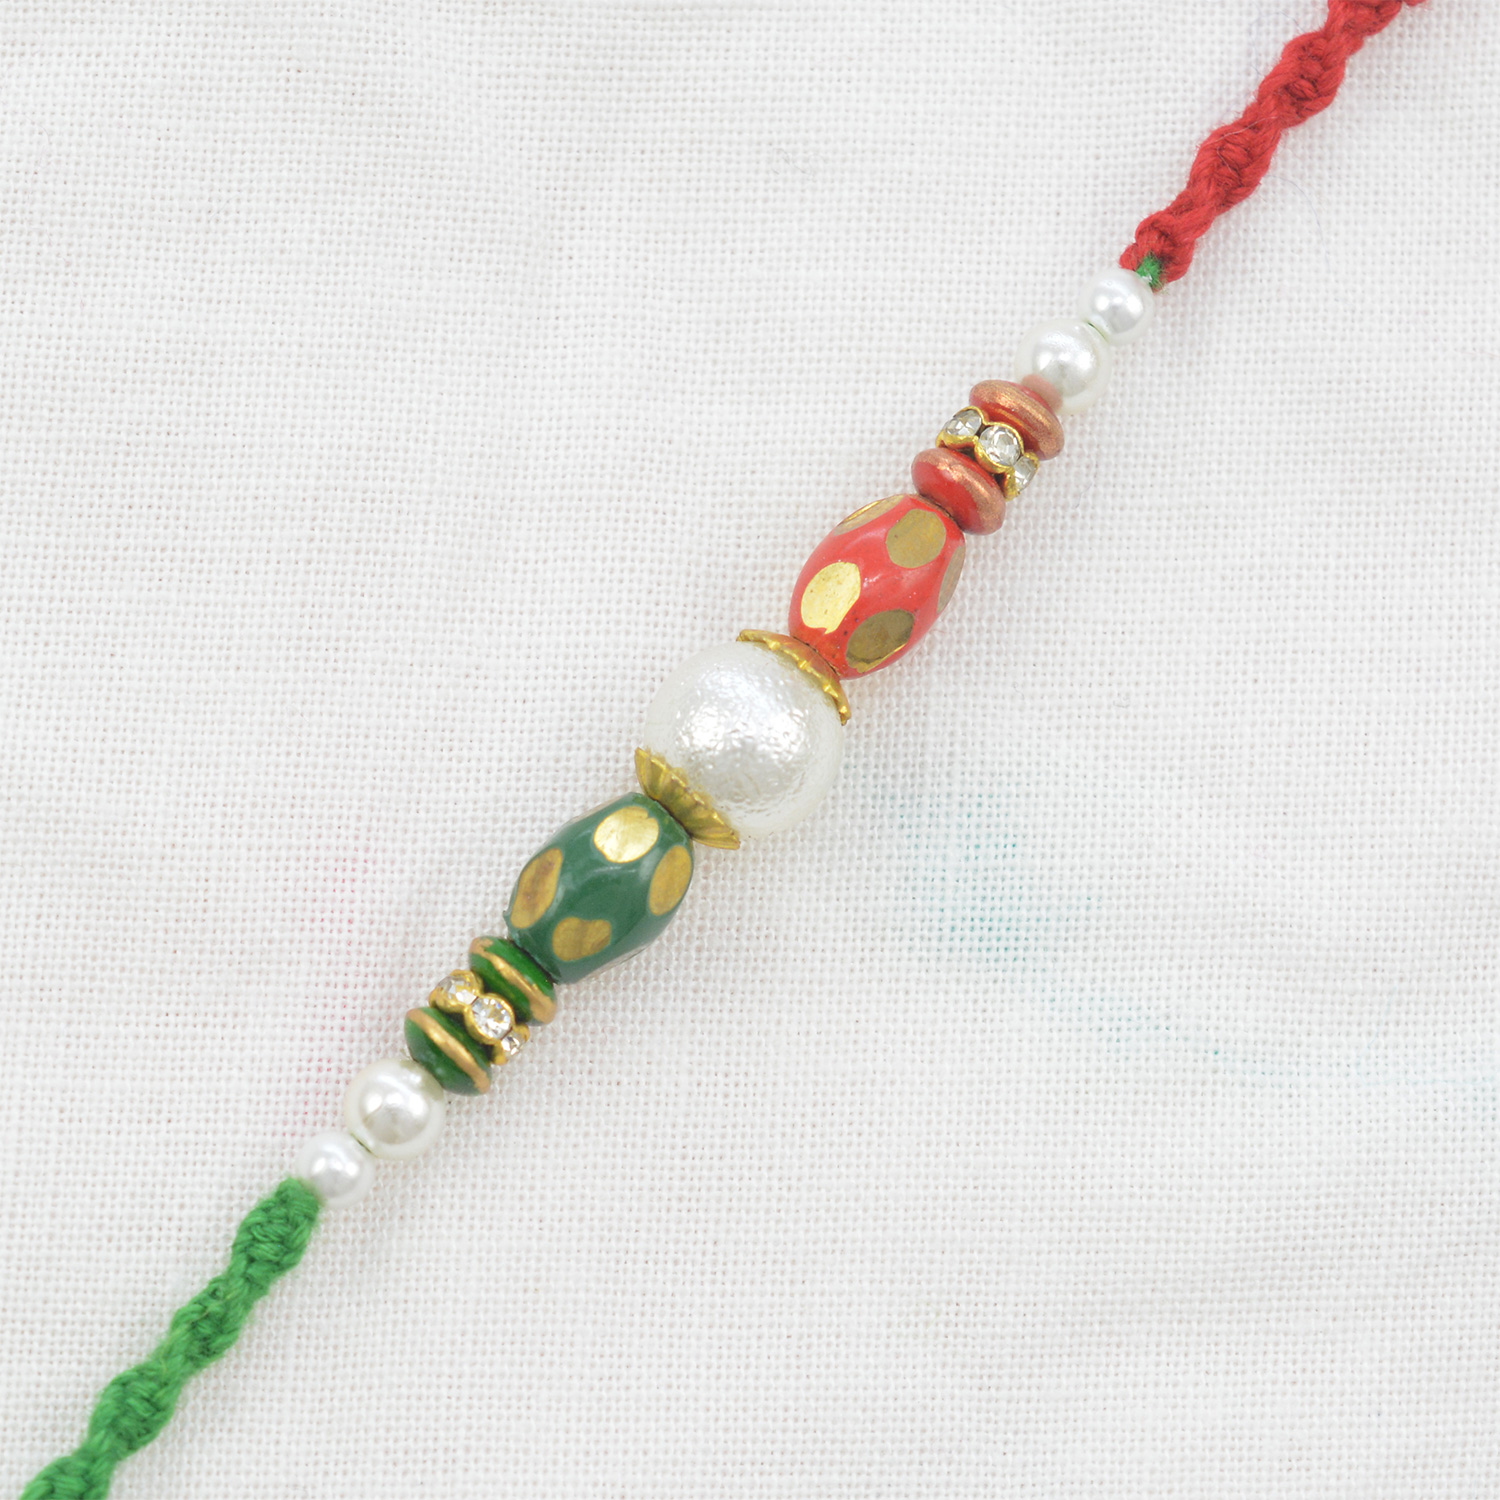 Center Base Pearl and Beads Rakhi in Red String